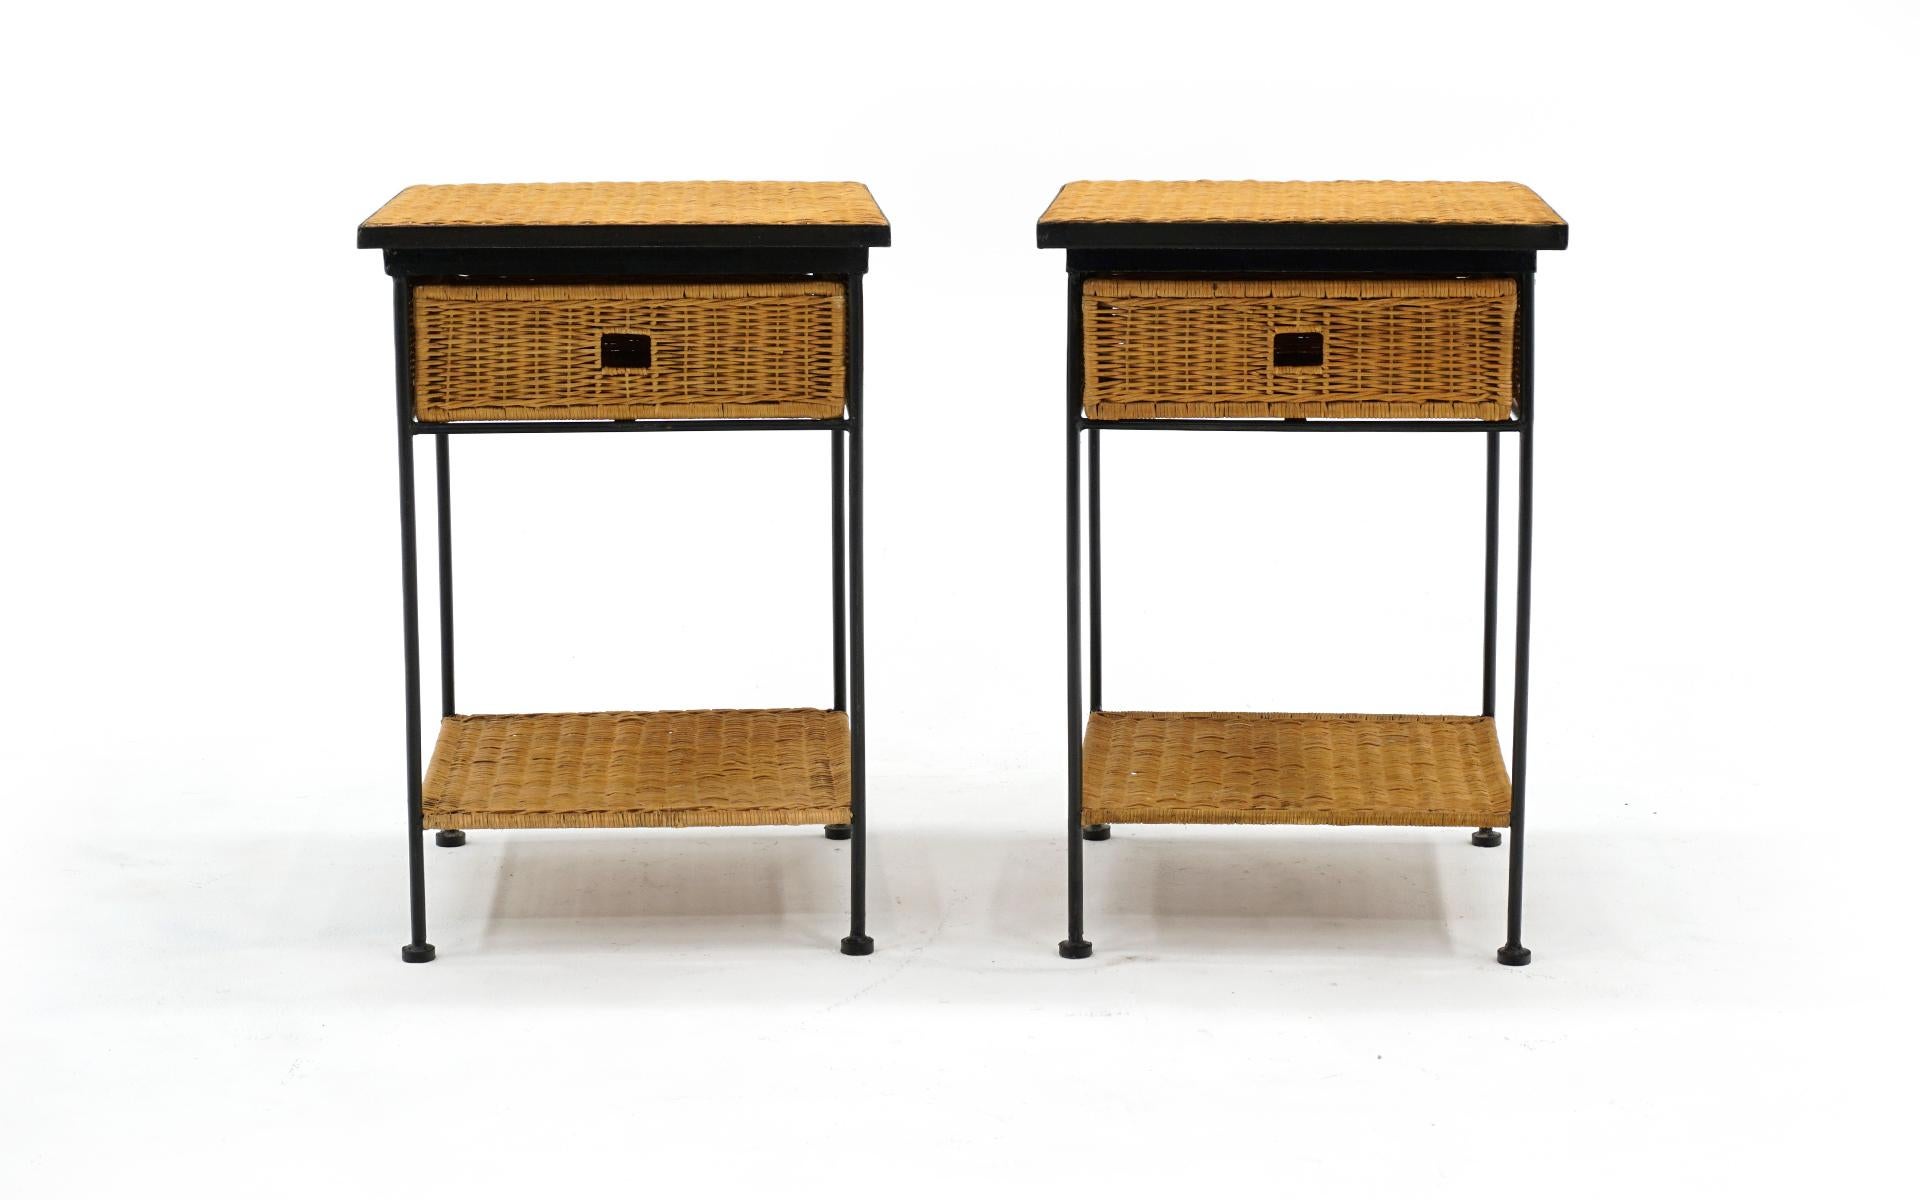 Pair of wicker and iron night stands / end tables with lower shelf similar to designs by Paul McCobb and Arthur Umanoff, The drawer in each functions smoothly. The wicker shows very few if any signs of use with no breaks, stains, or repairs. The